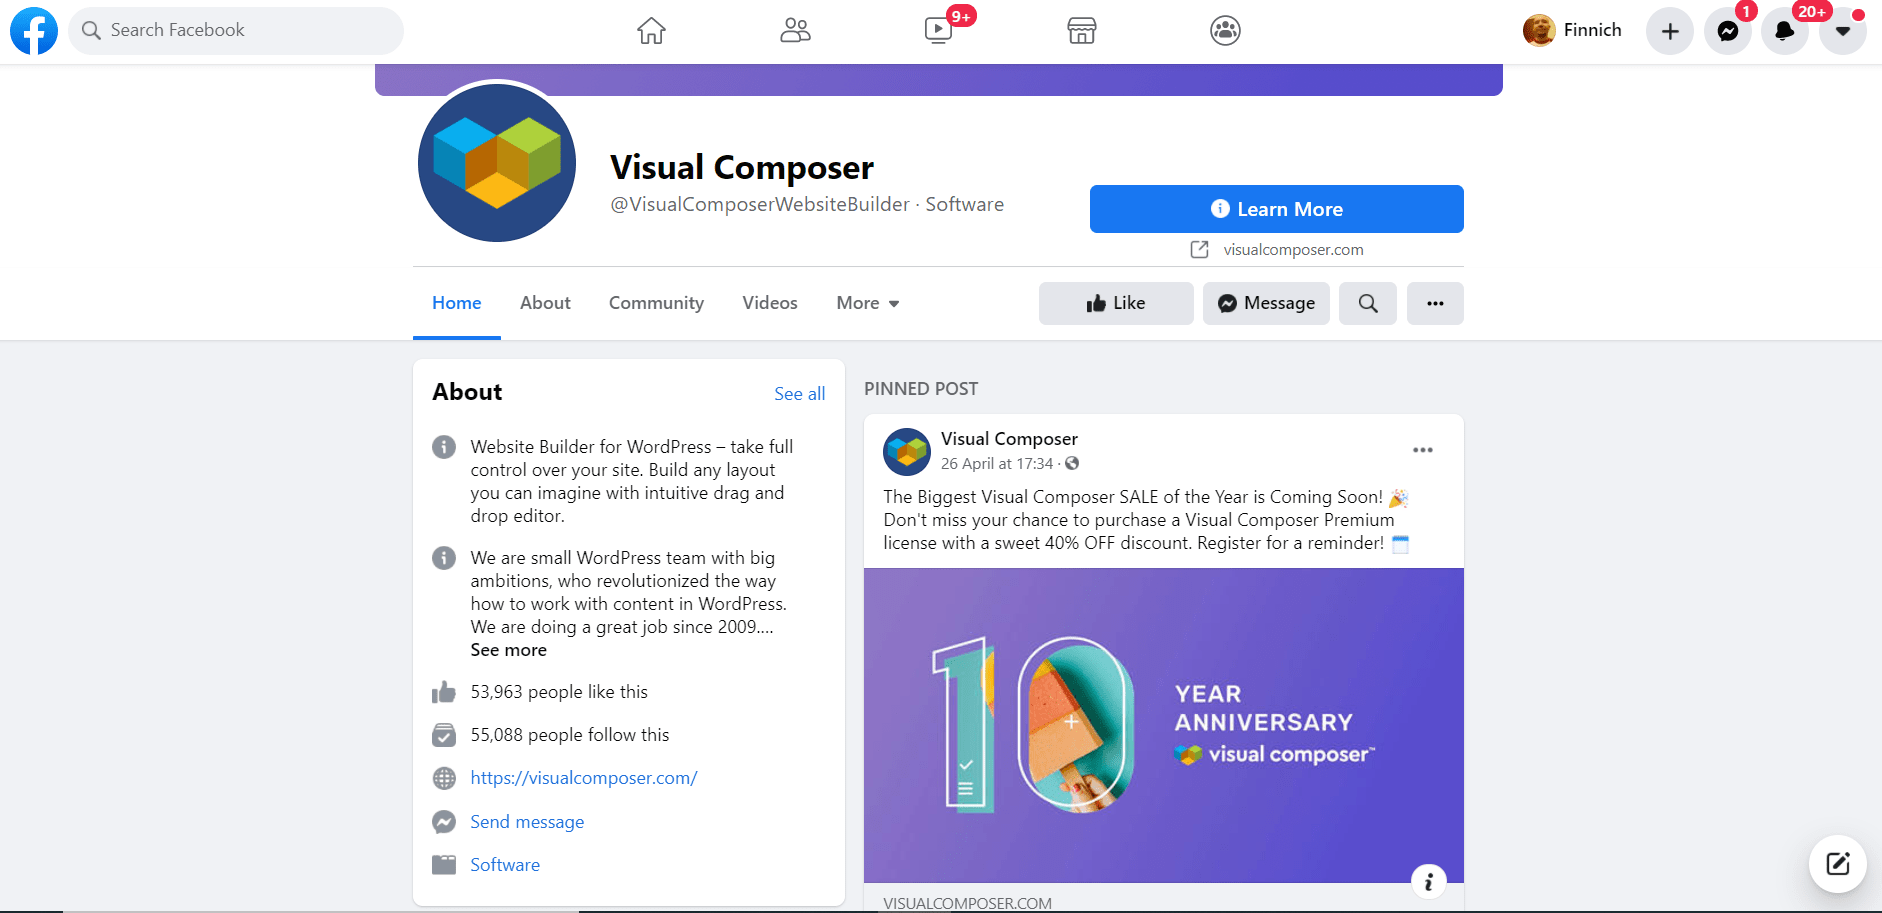 visual composer on facebook